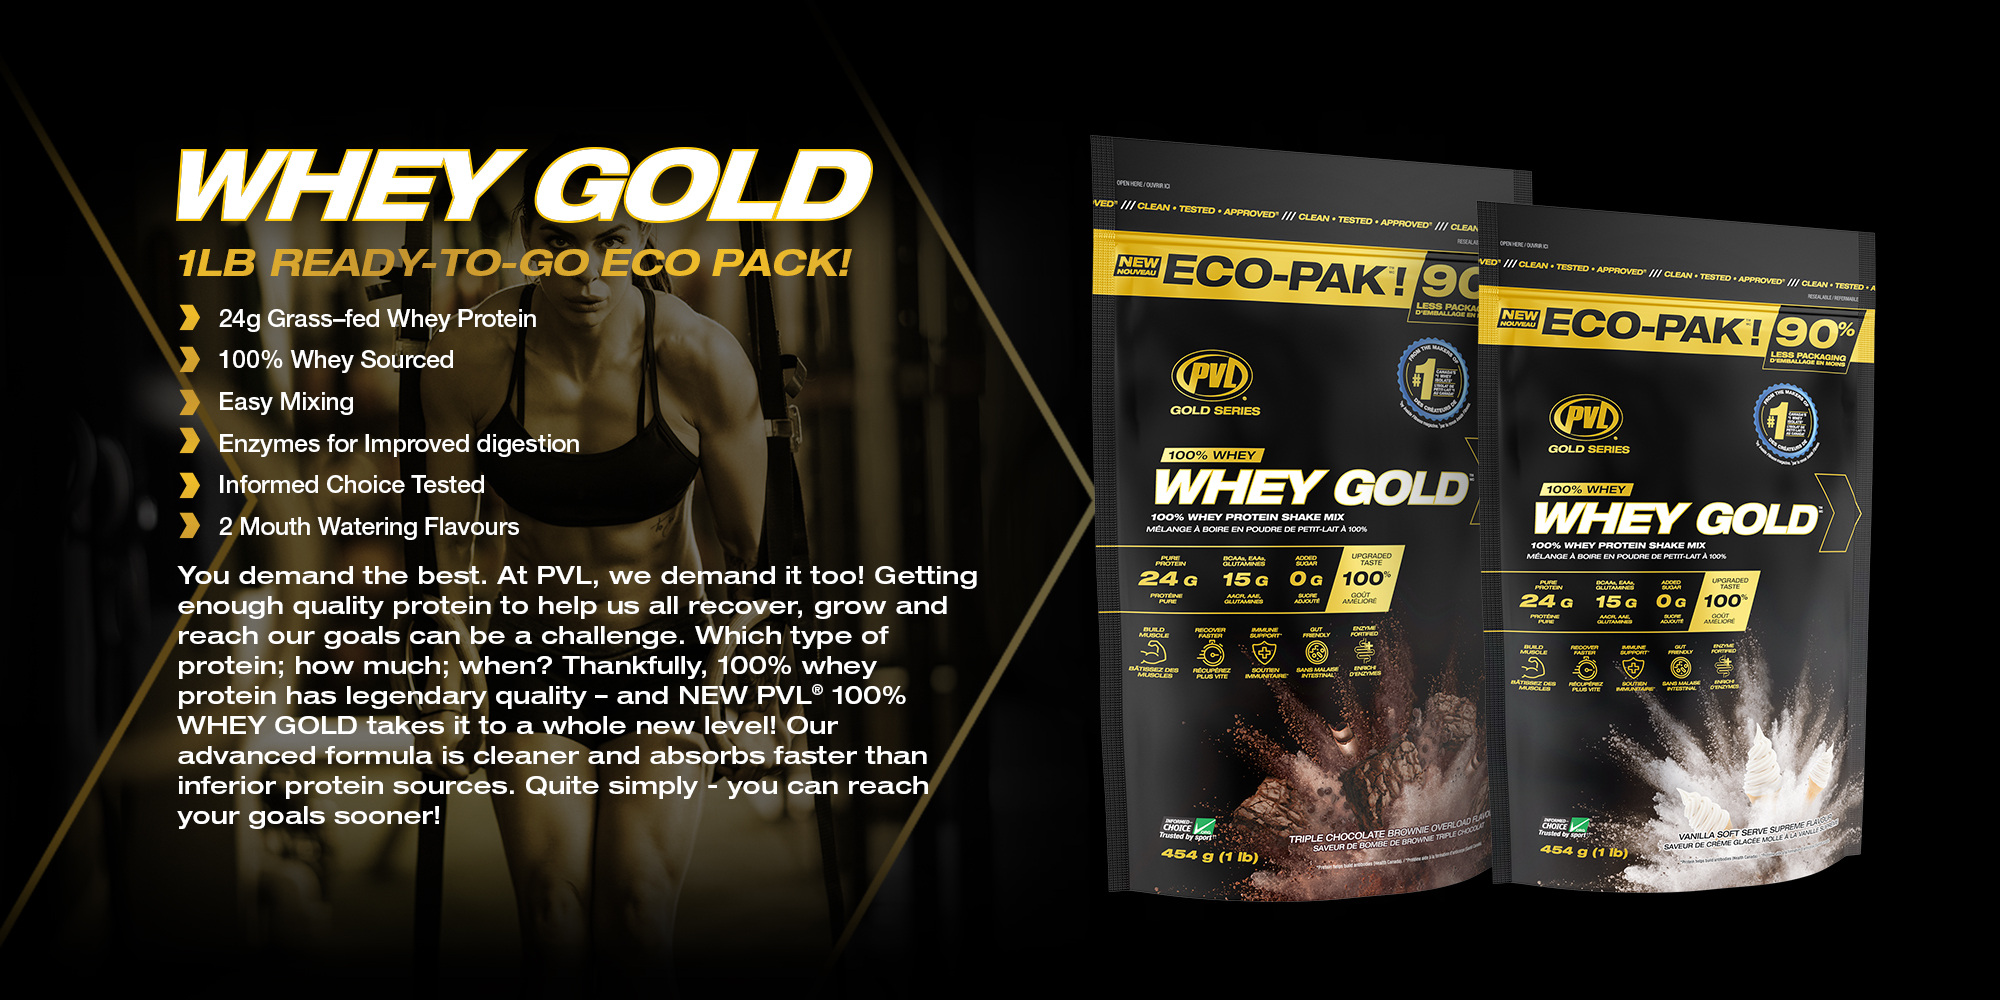 GSP-NM-220705-0947 STACK3D EXPO-2000x1000-Whey Gold